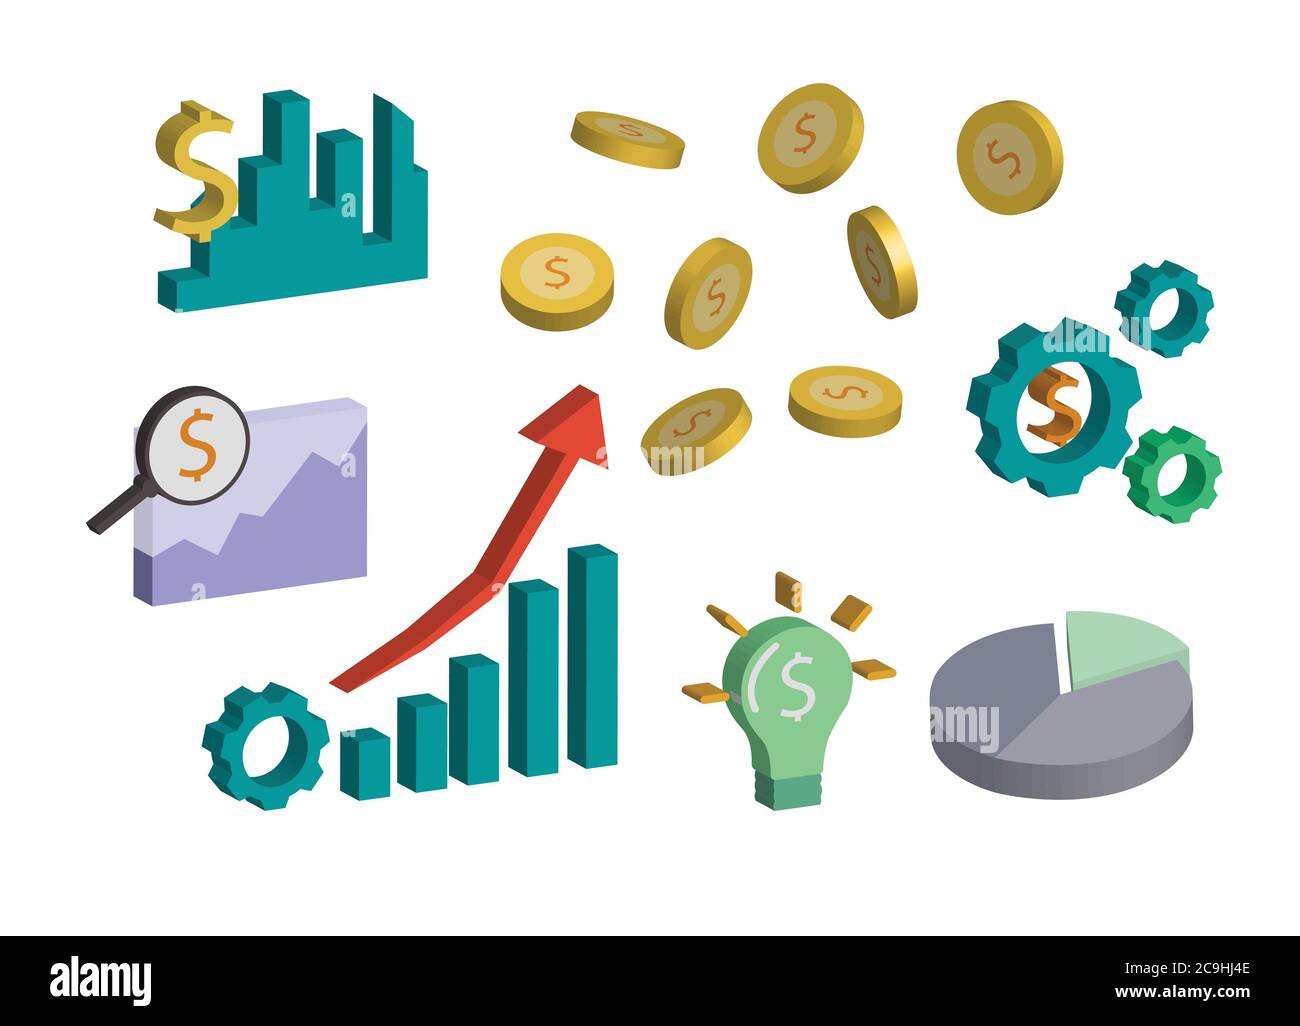 Various symbols relating to investment and finance isolated on white background. Stock Vector